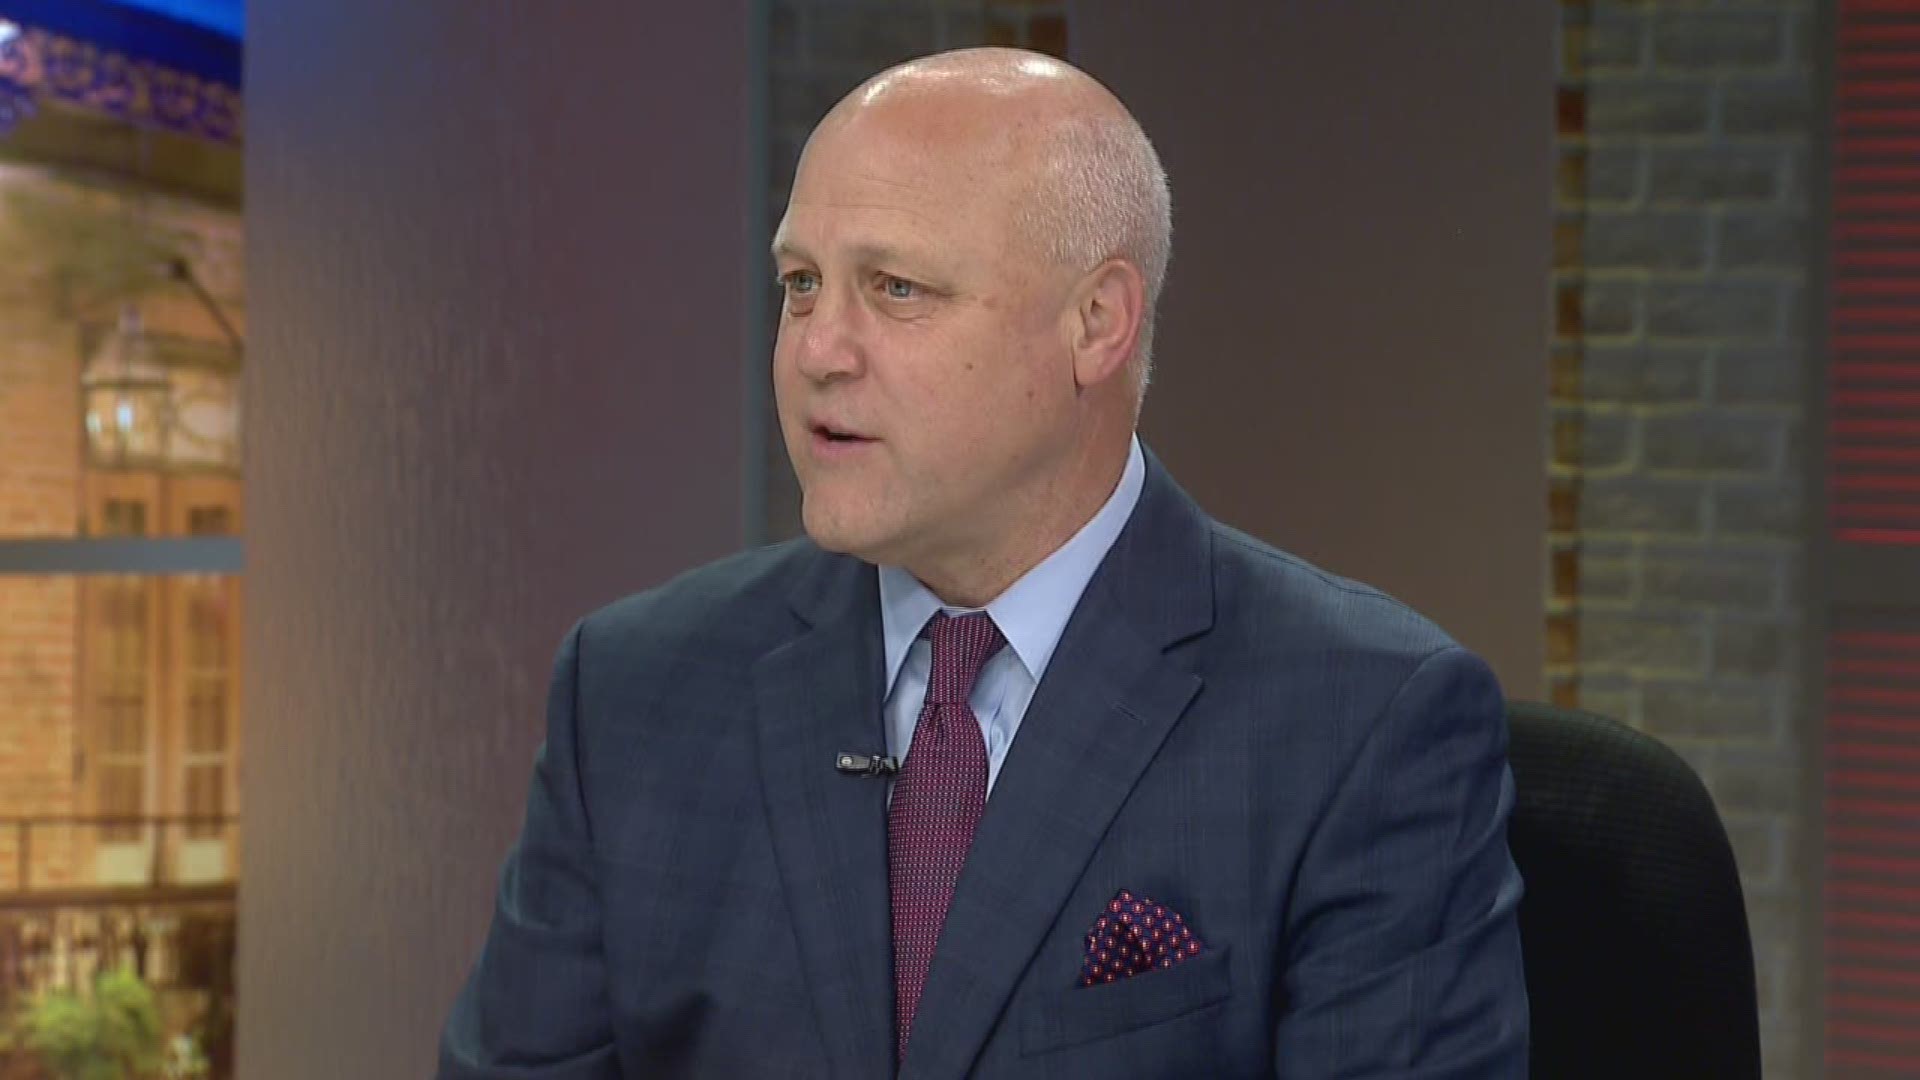 New Orleans Mayor Mitch Landrieu on why the presidential election is so important to the City of New Orleans.